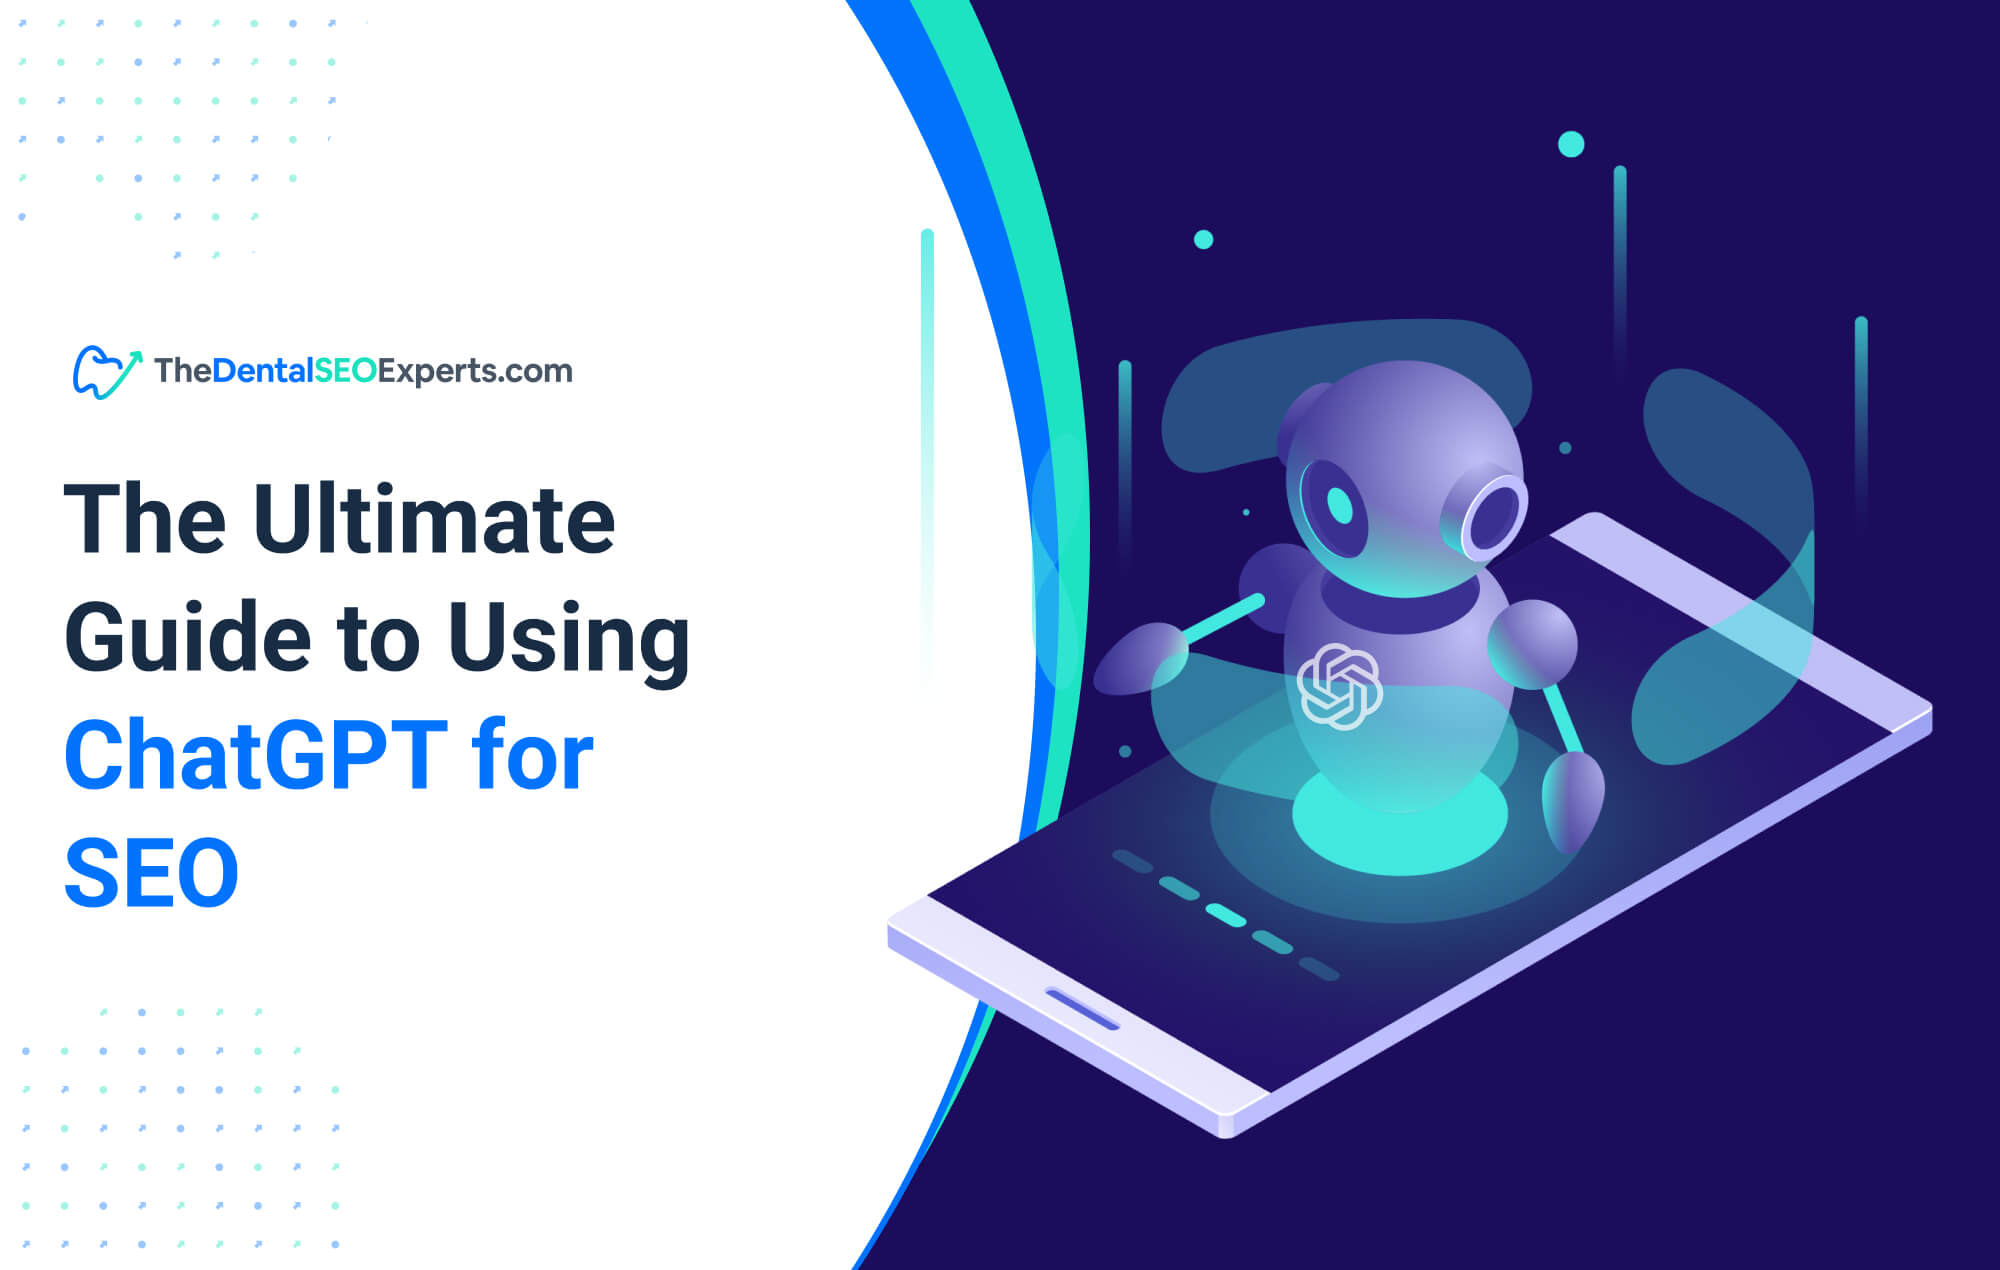 The Ultimate Guide to Using ChatGPT for SEO